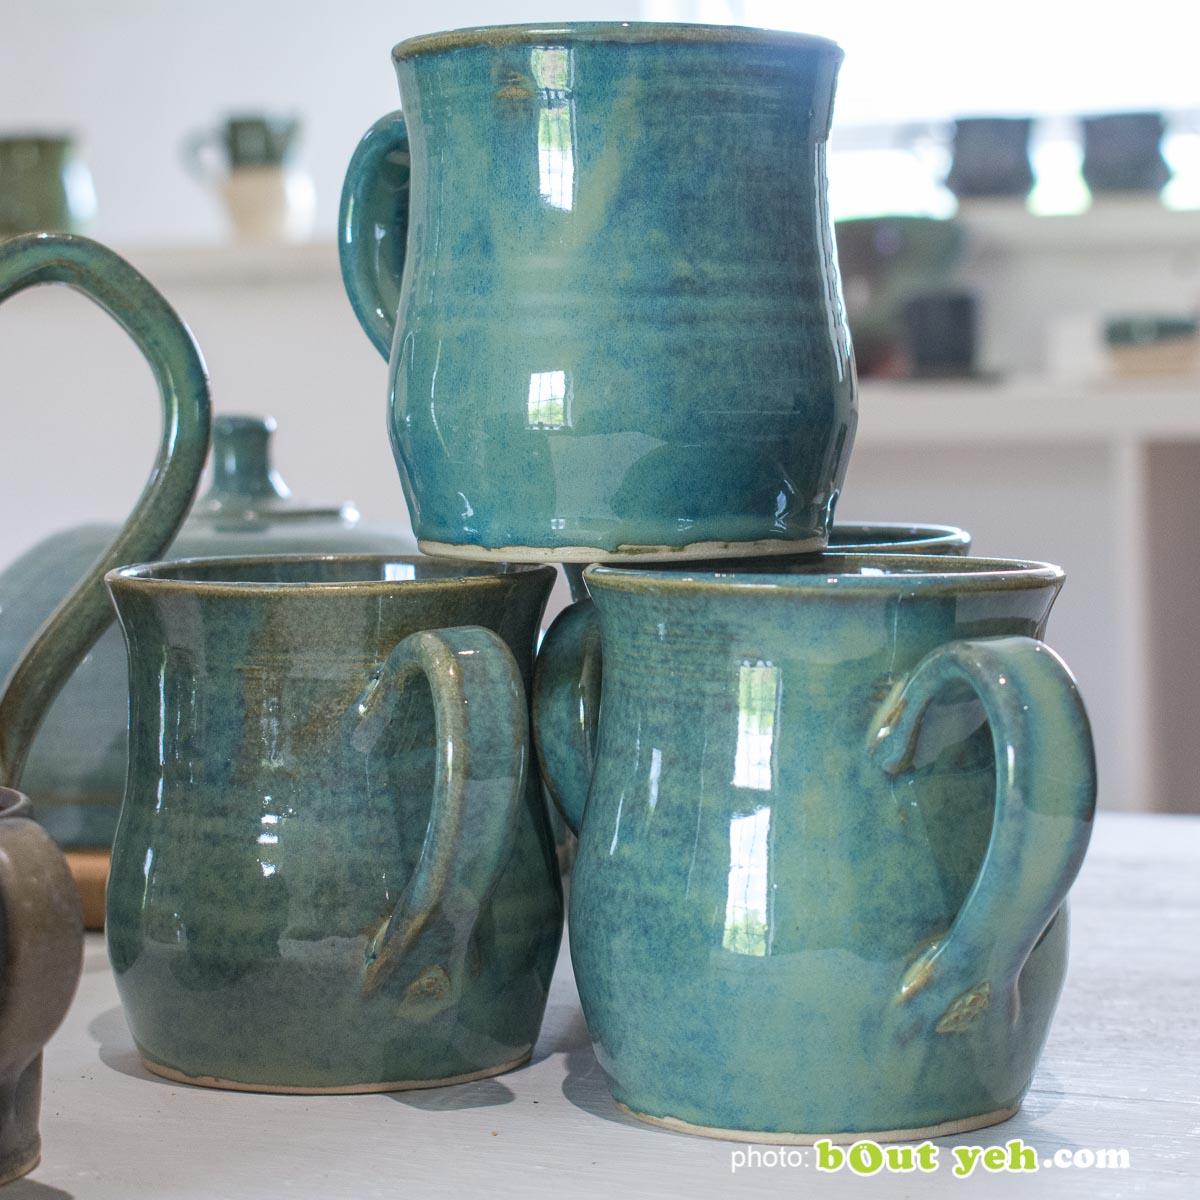 Contemporary hand made Irish pottery - tiffany blue and green curve-sided mug from Bout Yeh arts and crafts gallery Belfast and Dublin. Photo 1463